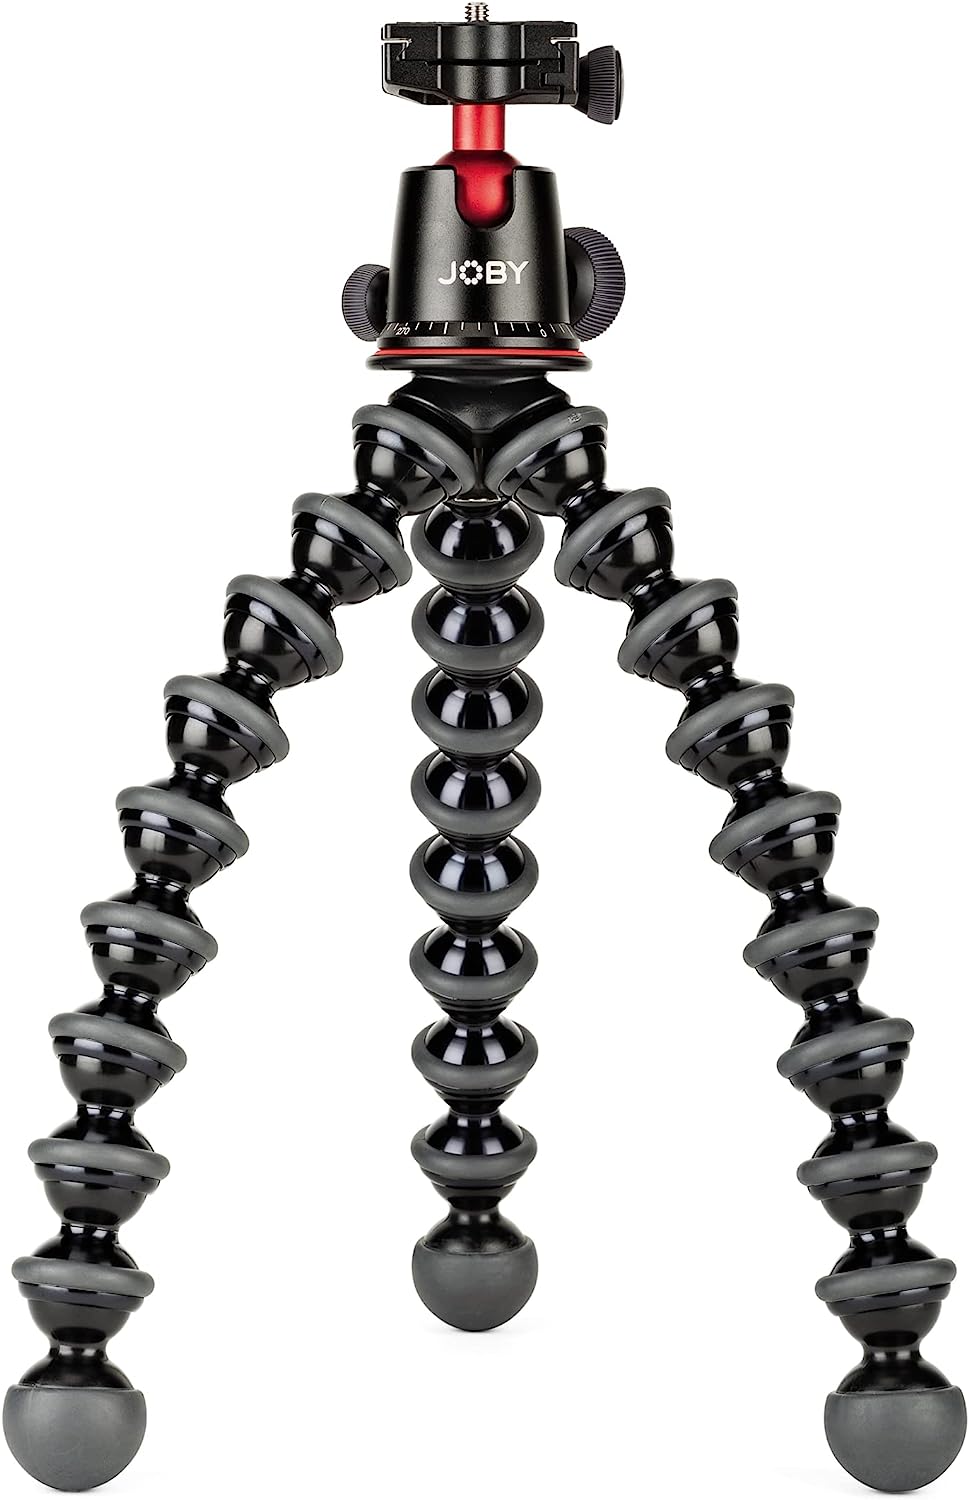 Product Image of JOBY GorillaPod 5K Kit, Flexible Professional Tripod with BallHead for DSLR and CSC/Mirrorless Camera Up to 5 kg Payload